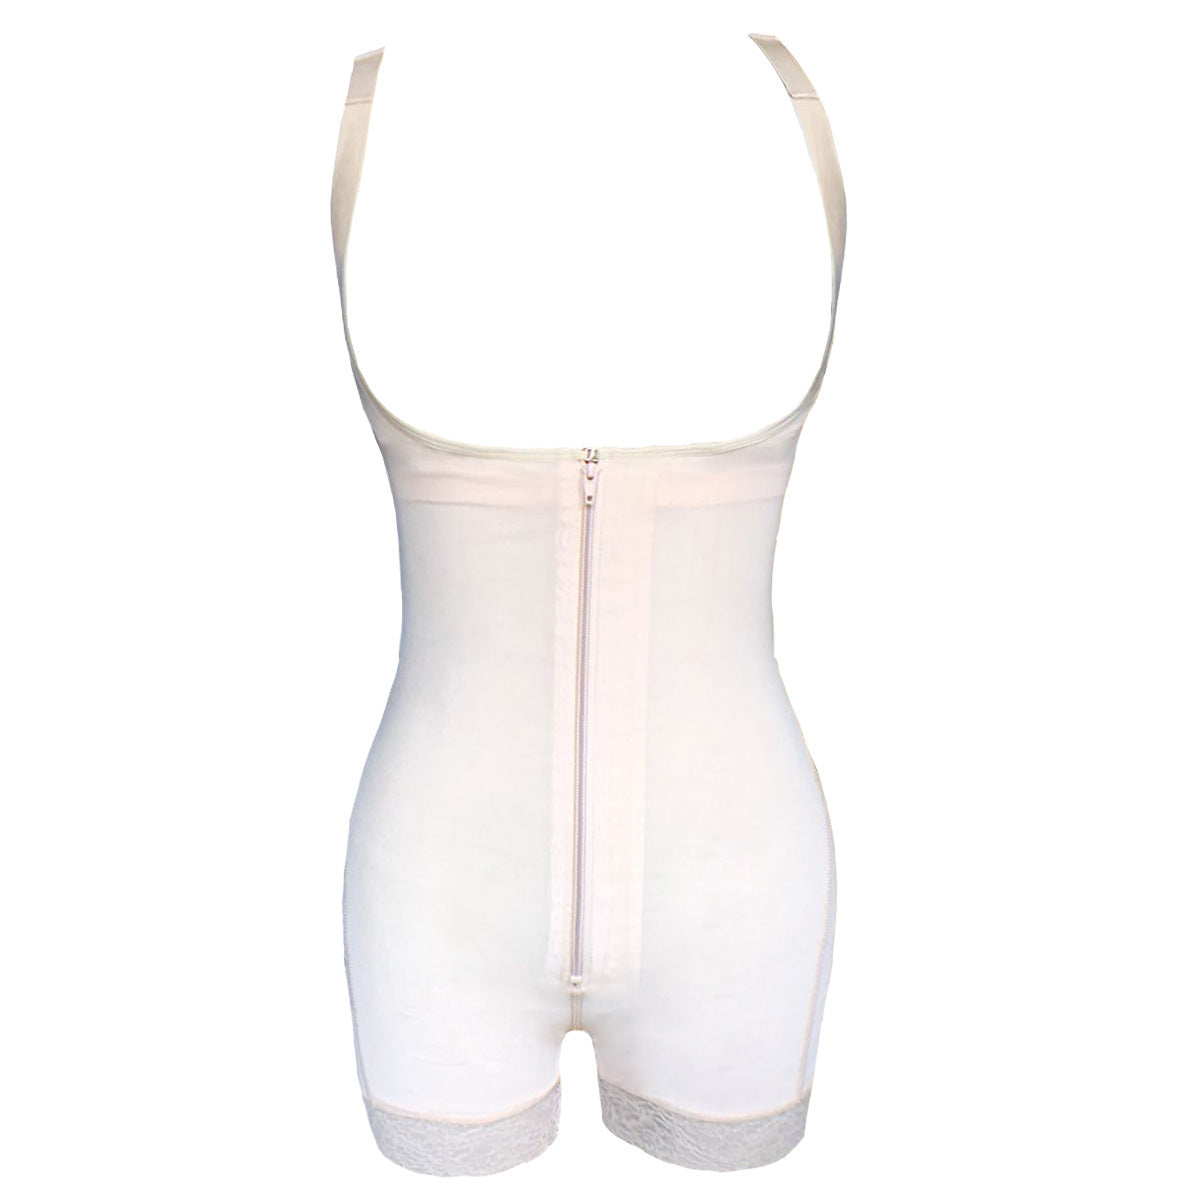 Plus Size Lace Waist Shaping Suspender Butt Lifter | Art in Aging